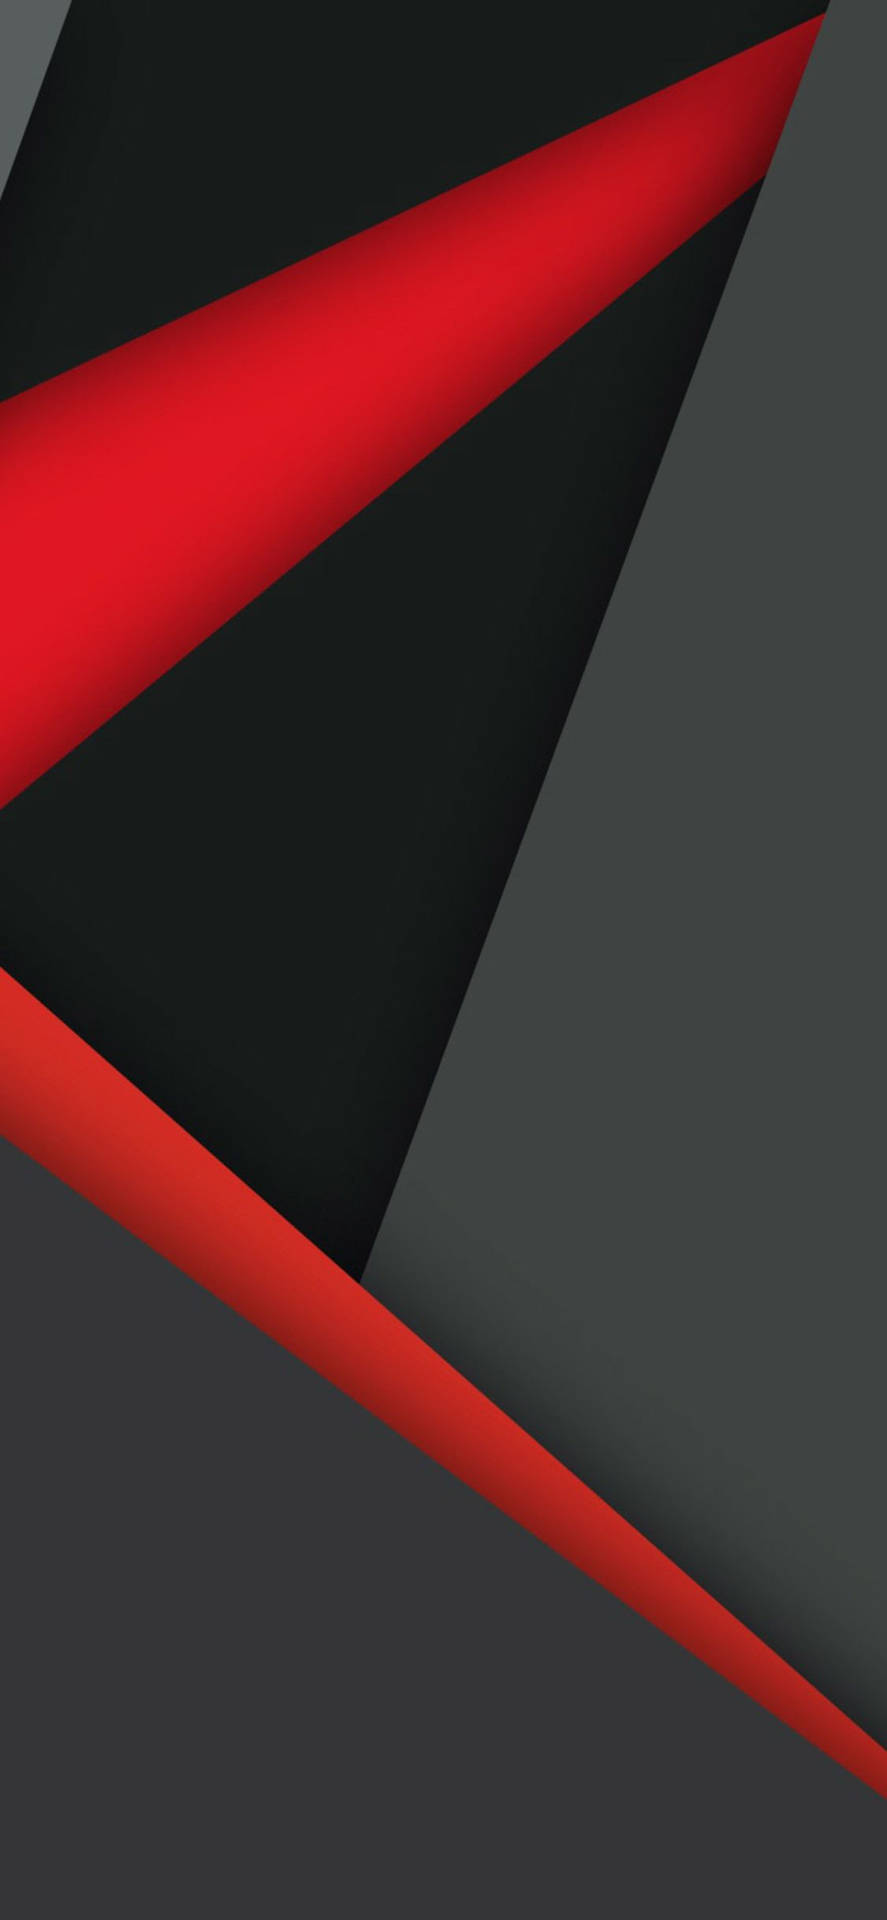 Bright and Vibrant Red and Black iPhone Wallpaper